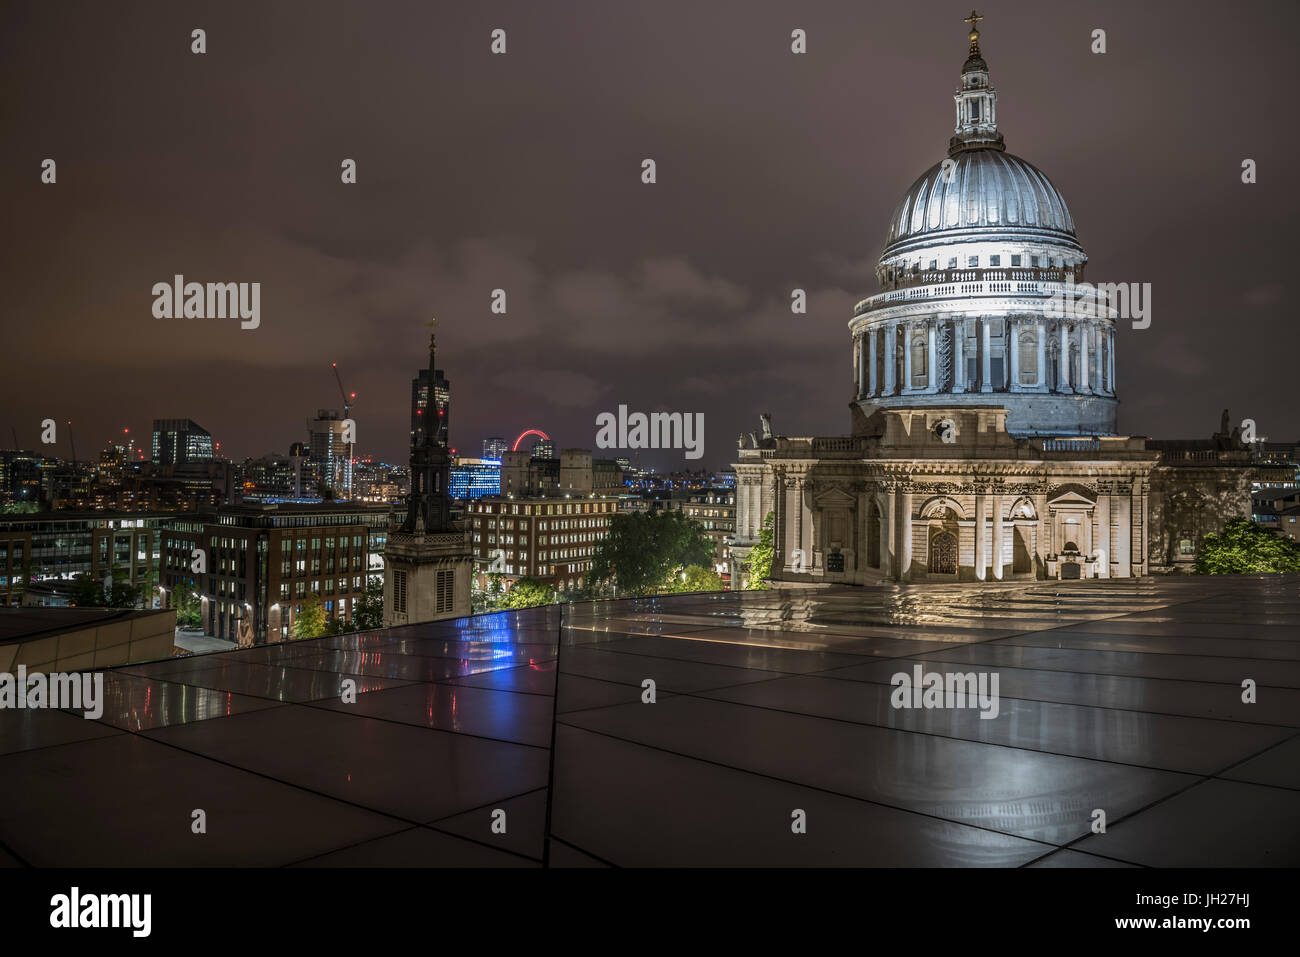 Floodlit dome of St. Pauls Cathedral at night from One New Change, City of London, London, England, United Kingdom, Europe Stock Photo